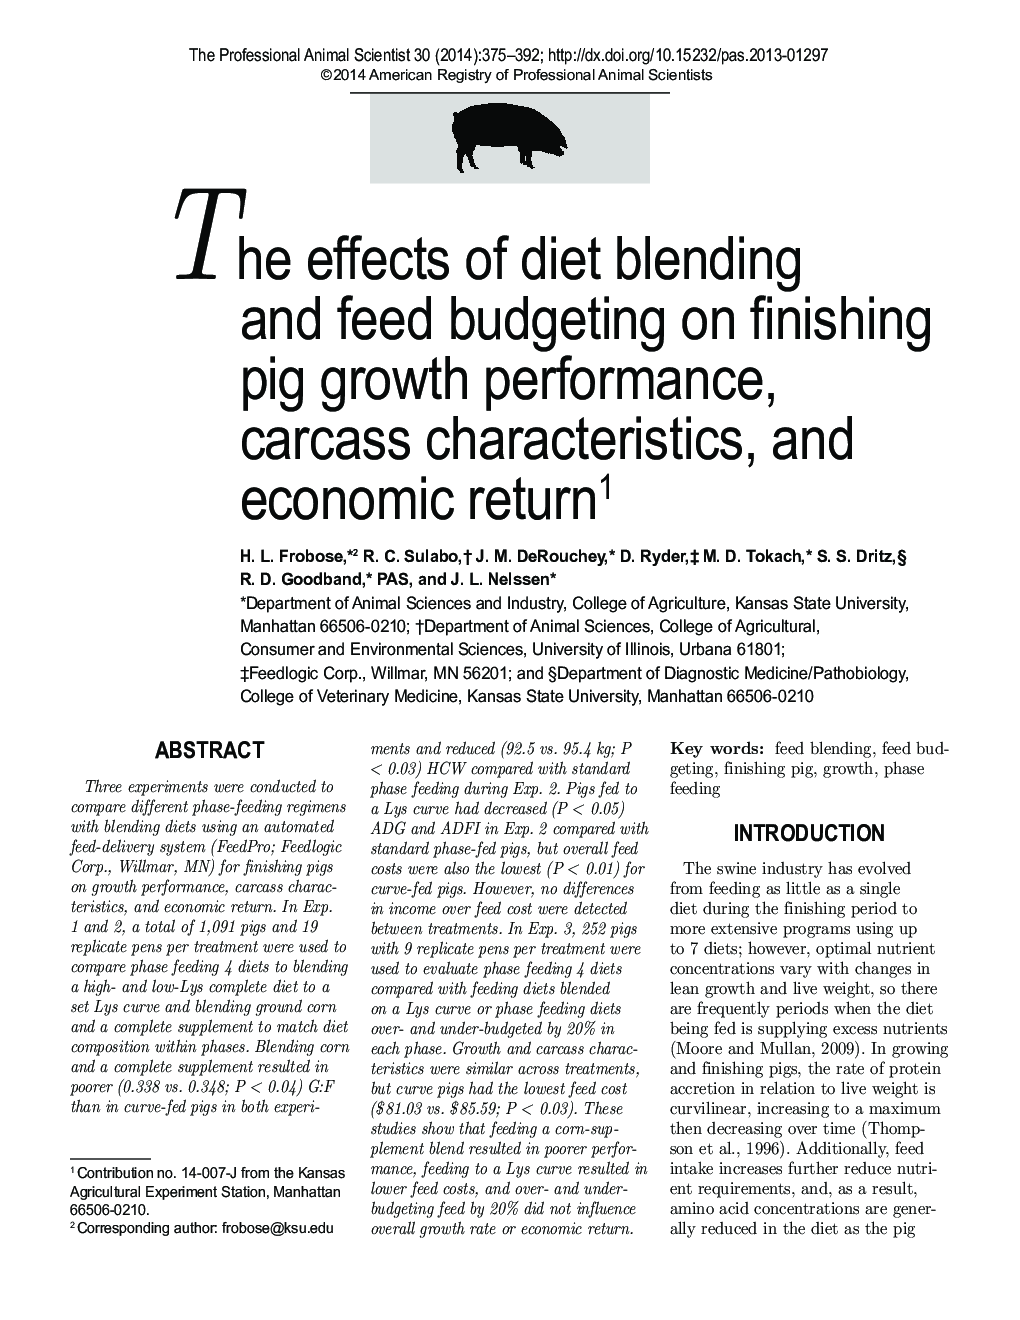 The effects of diet blending and feed budgeting on finishing pig growth performance, carcass characteristics, and economic return1